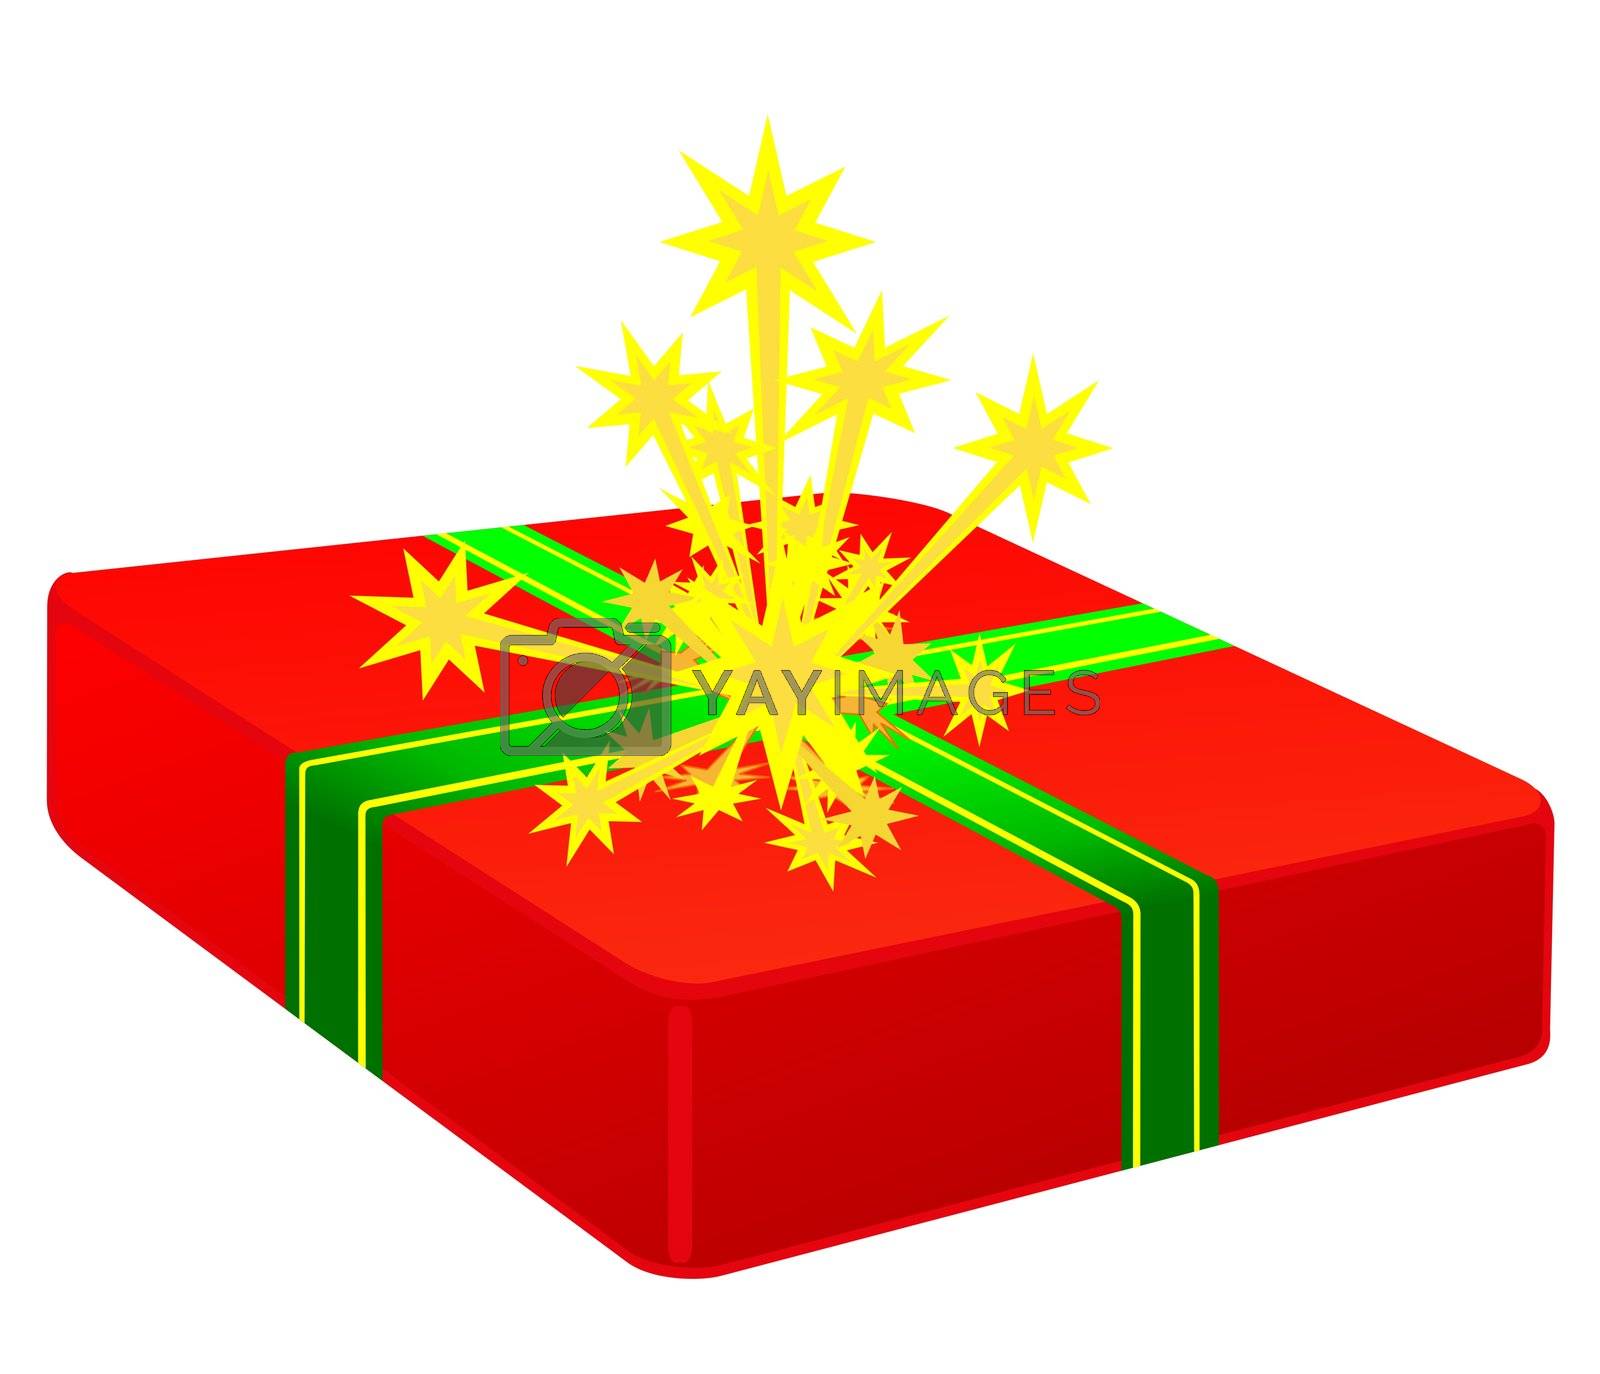 Royalty free image of Christmas Parcel by brigg